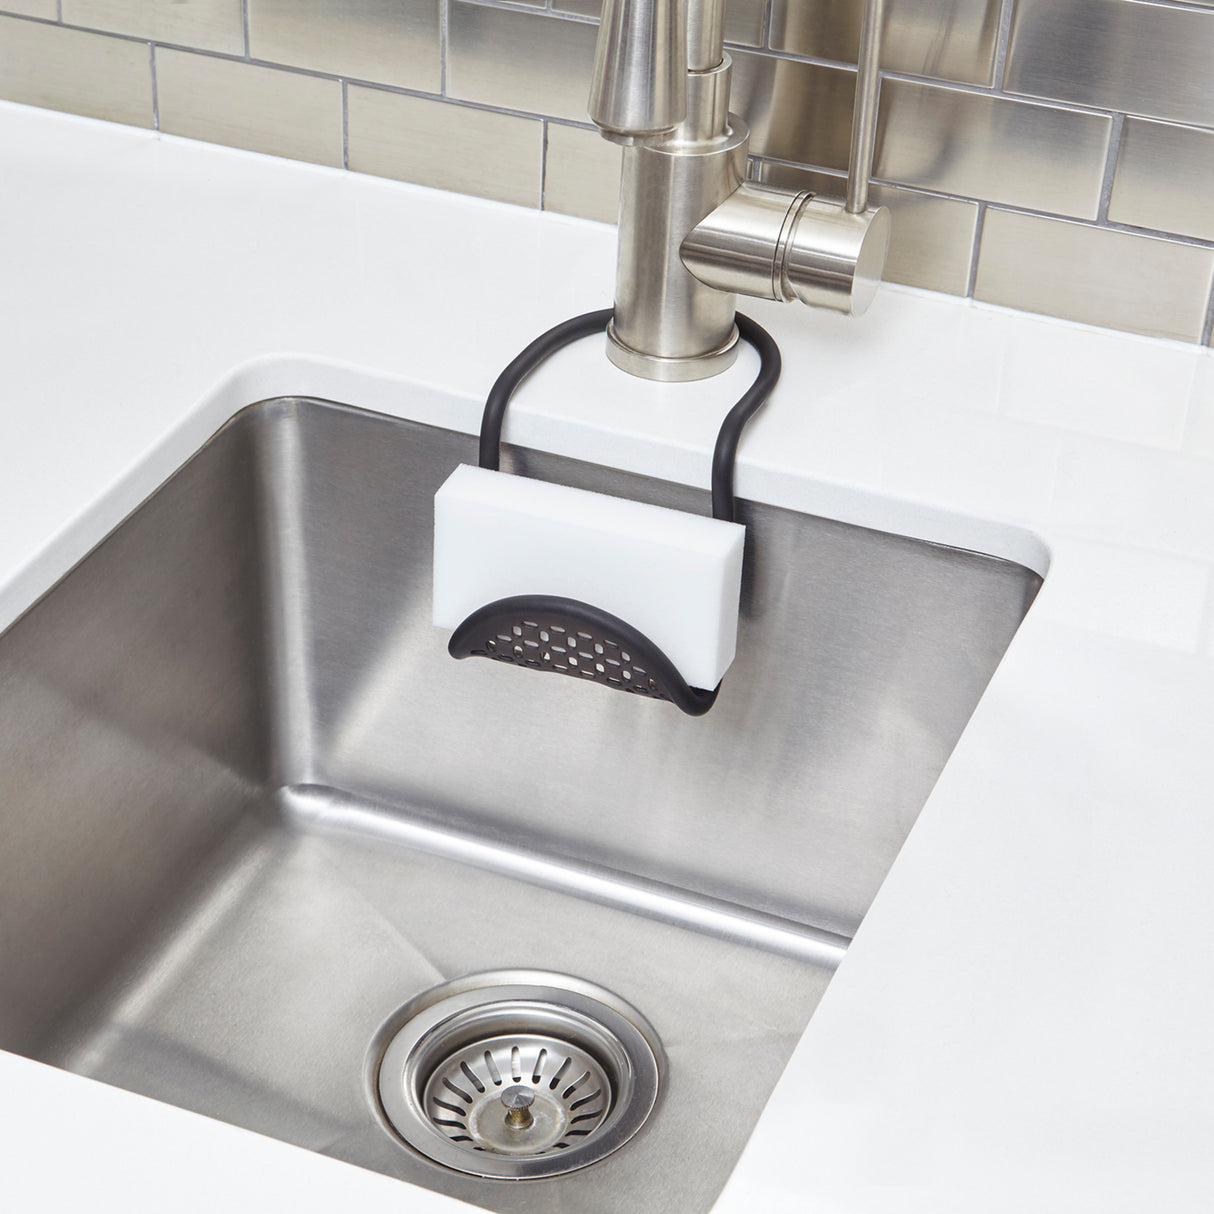 I Tried the Umbra Flex Sink Squeegee and My Sink Has Never Looked Better